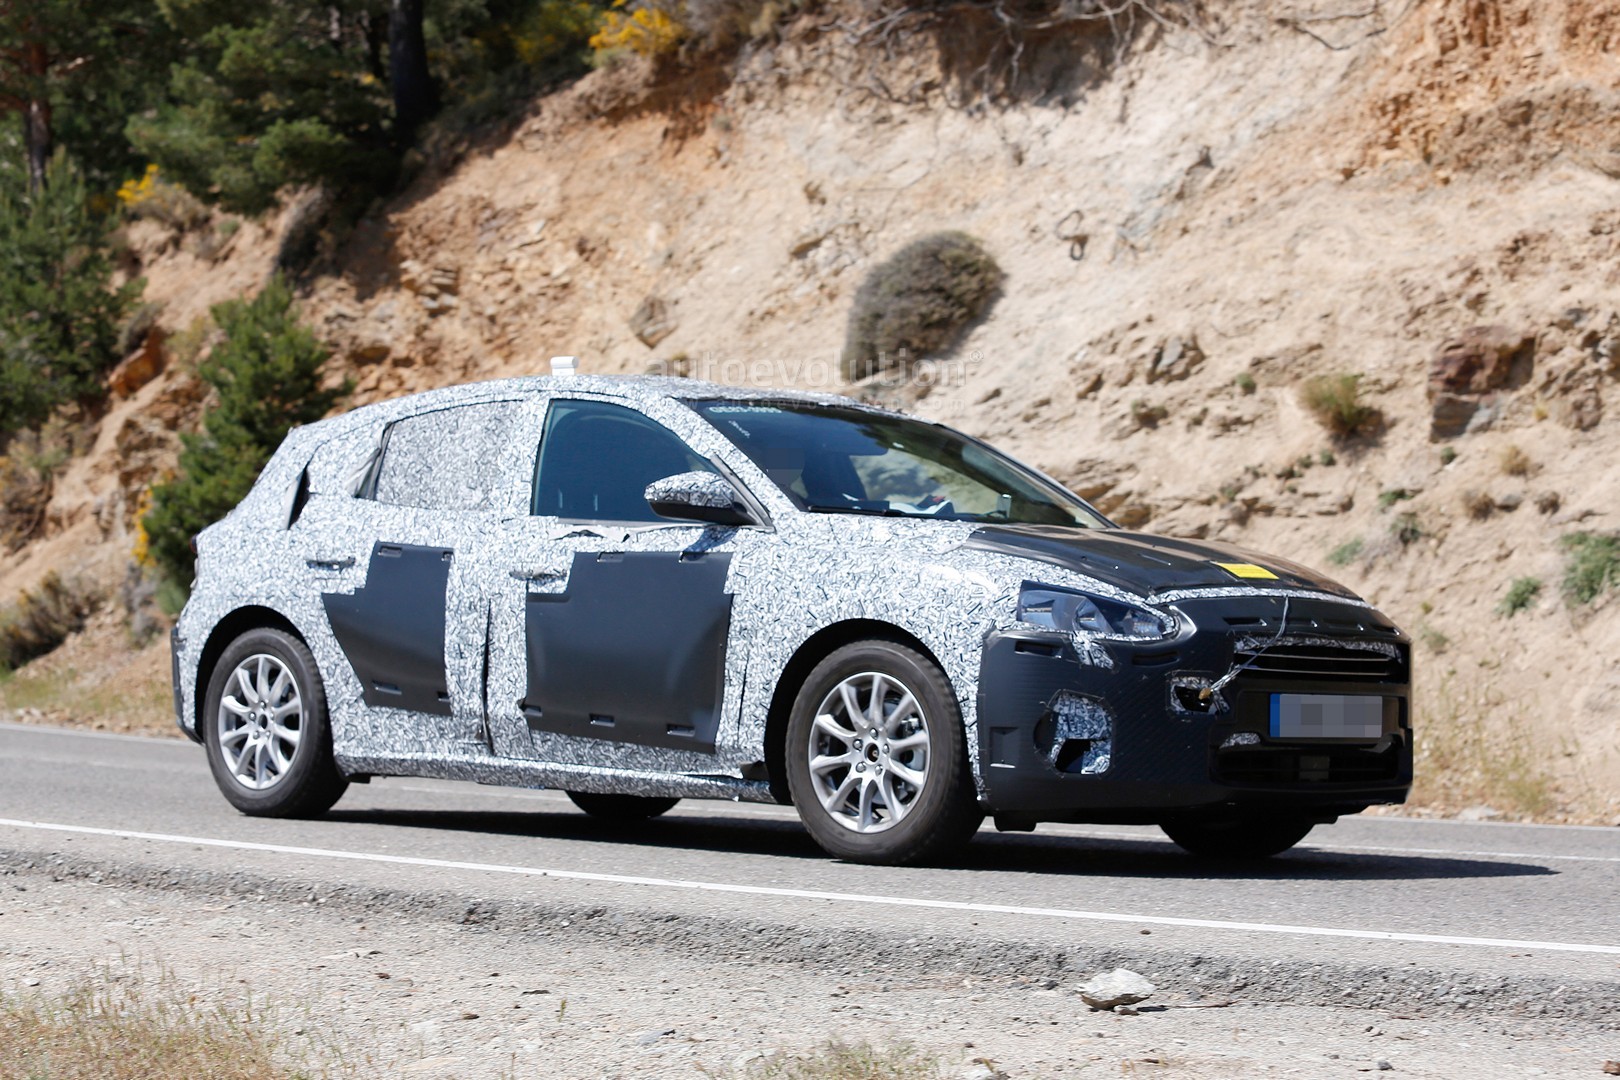 2019 Ford Focus (Mk4) To Debut In First Half Of 2018 - autoevolution